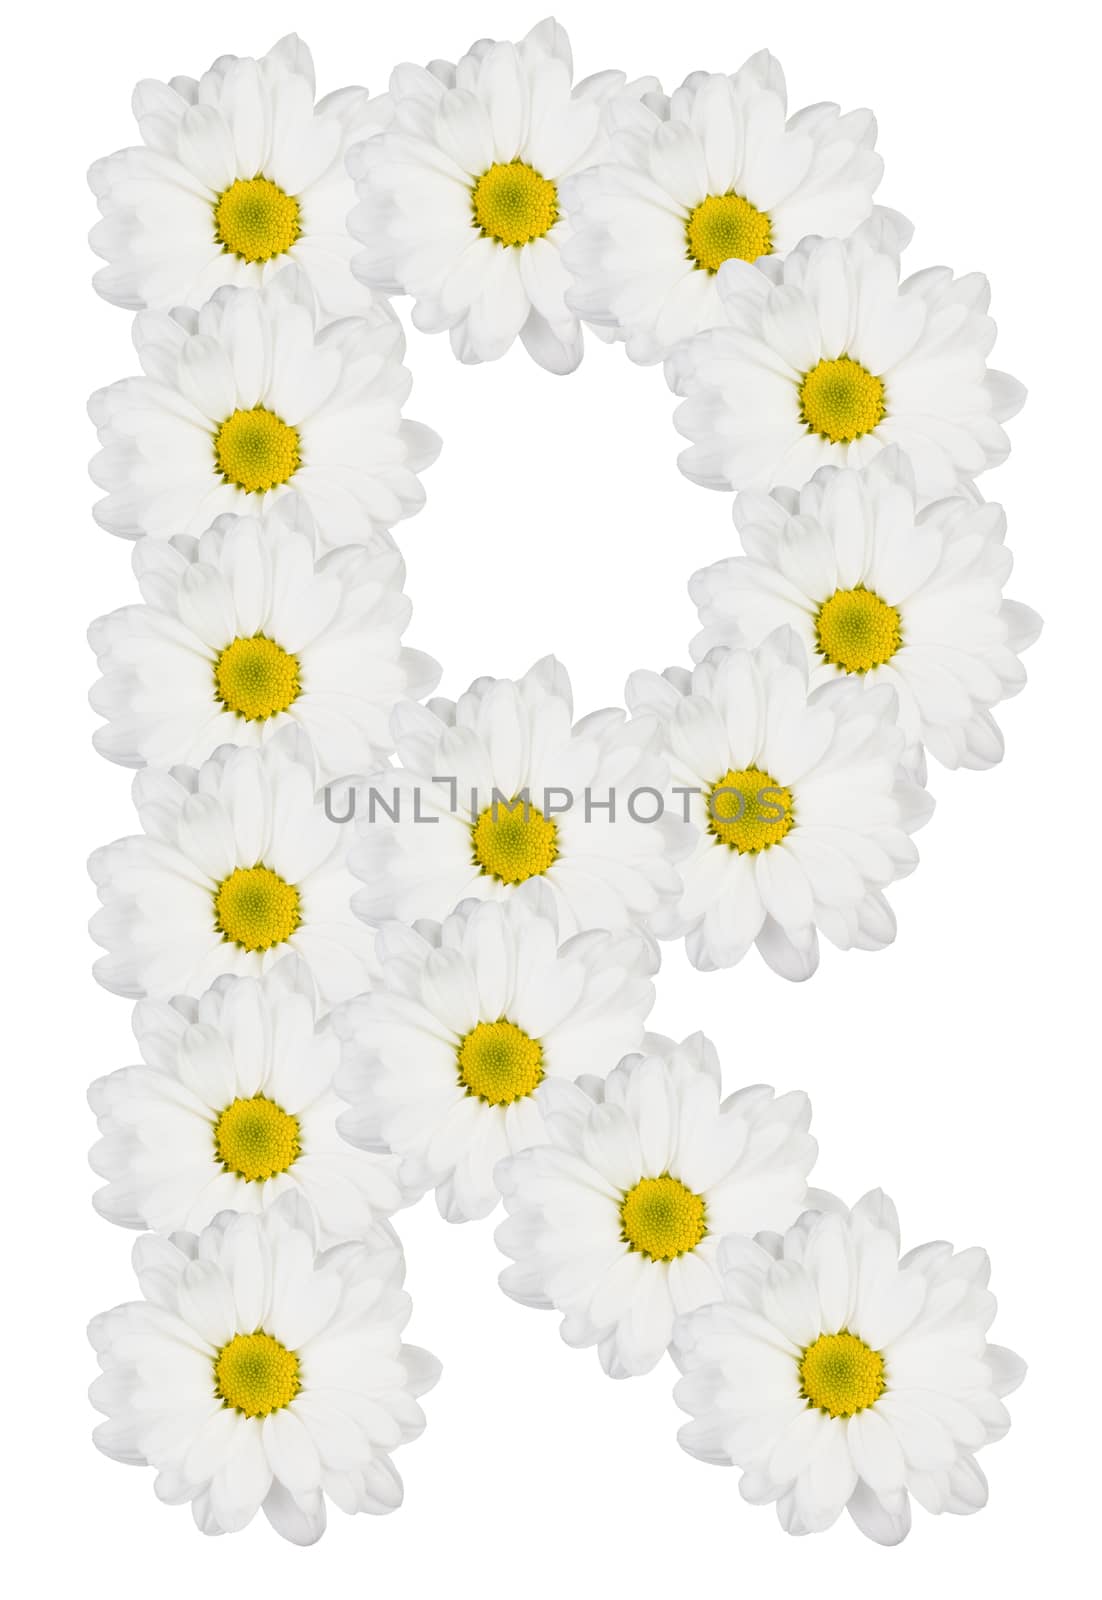 Letter R made from white flowers